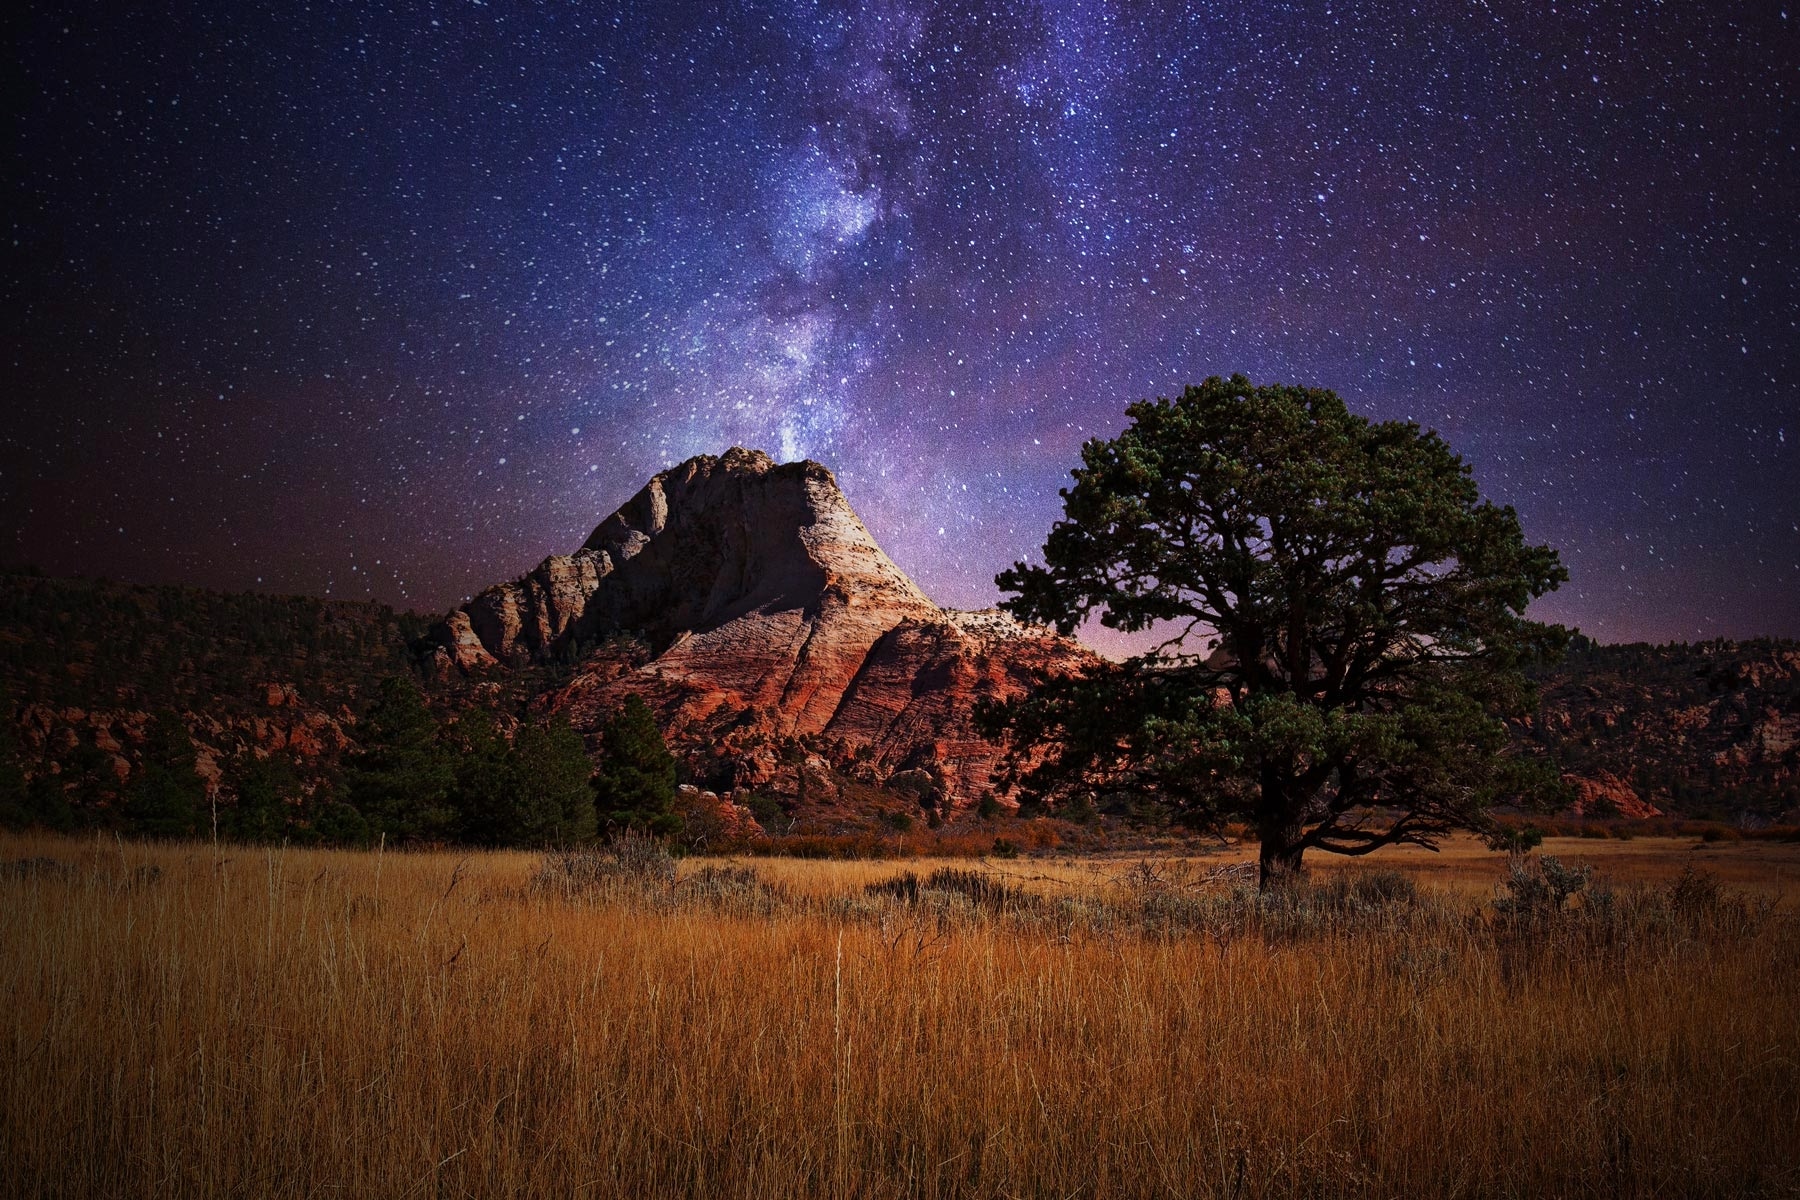 A mountain and a tree below a galaxy of stars in Zion National Park.